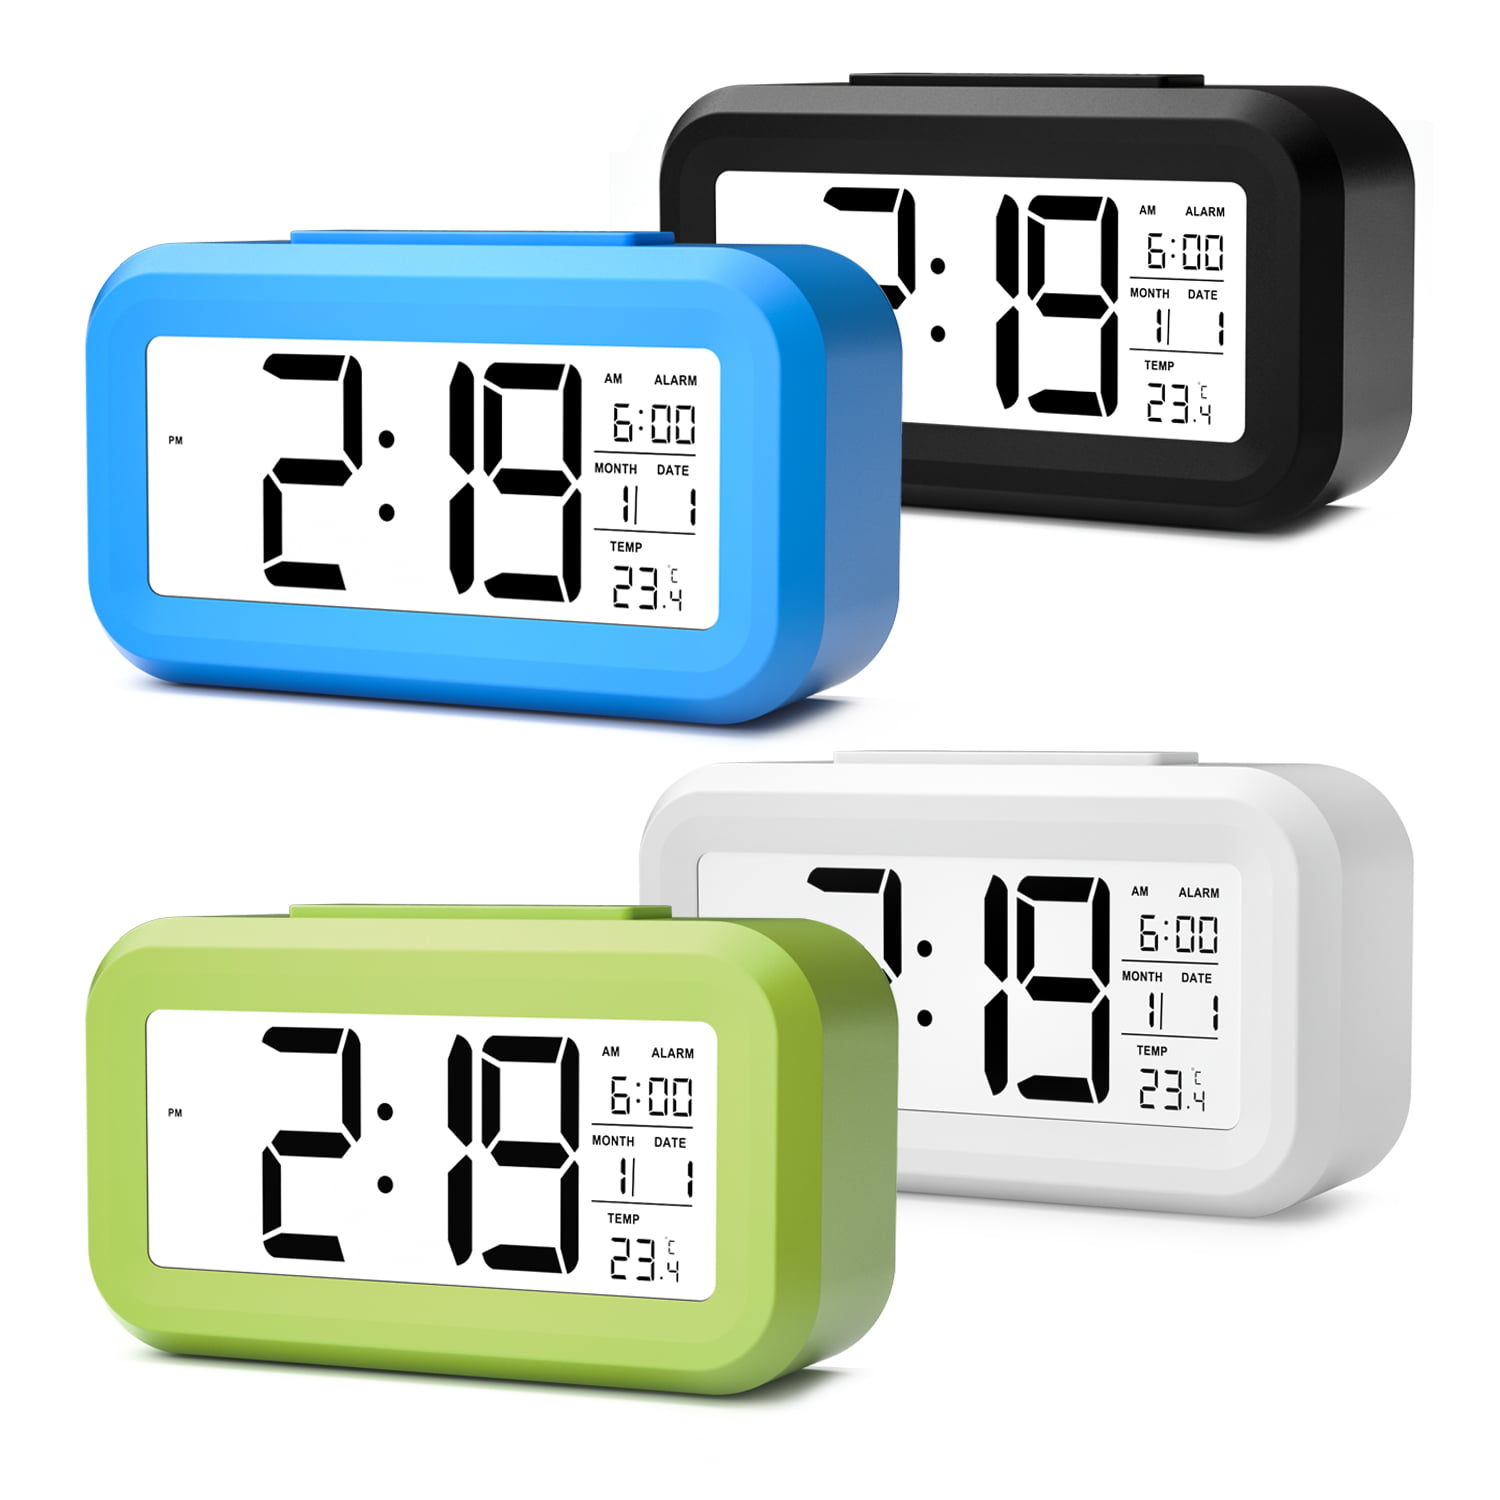 PETSOLA Digital Alarm Clock Blue Backlight With Snooze For Bedroom Time Date White